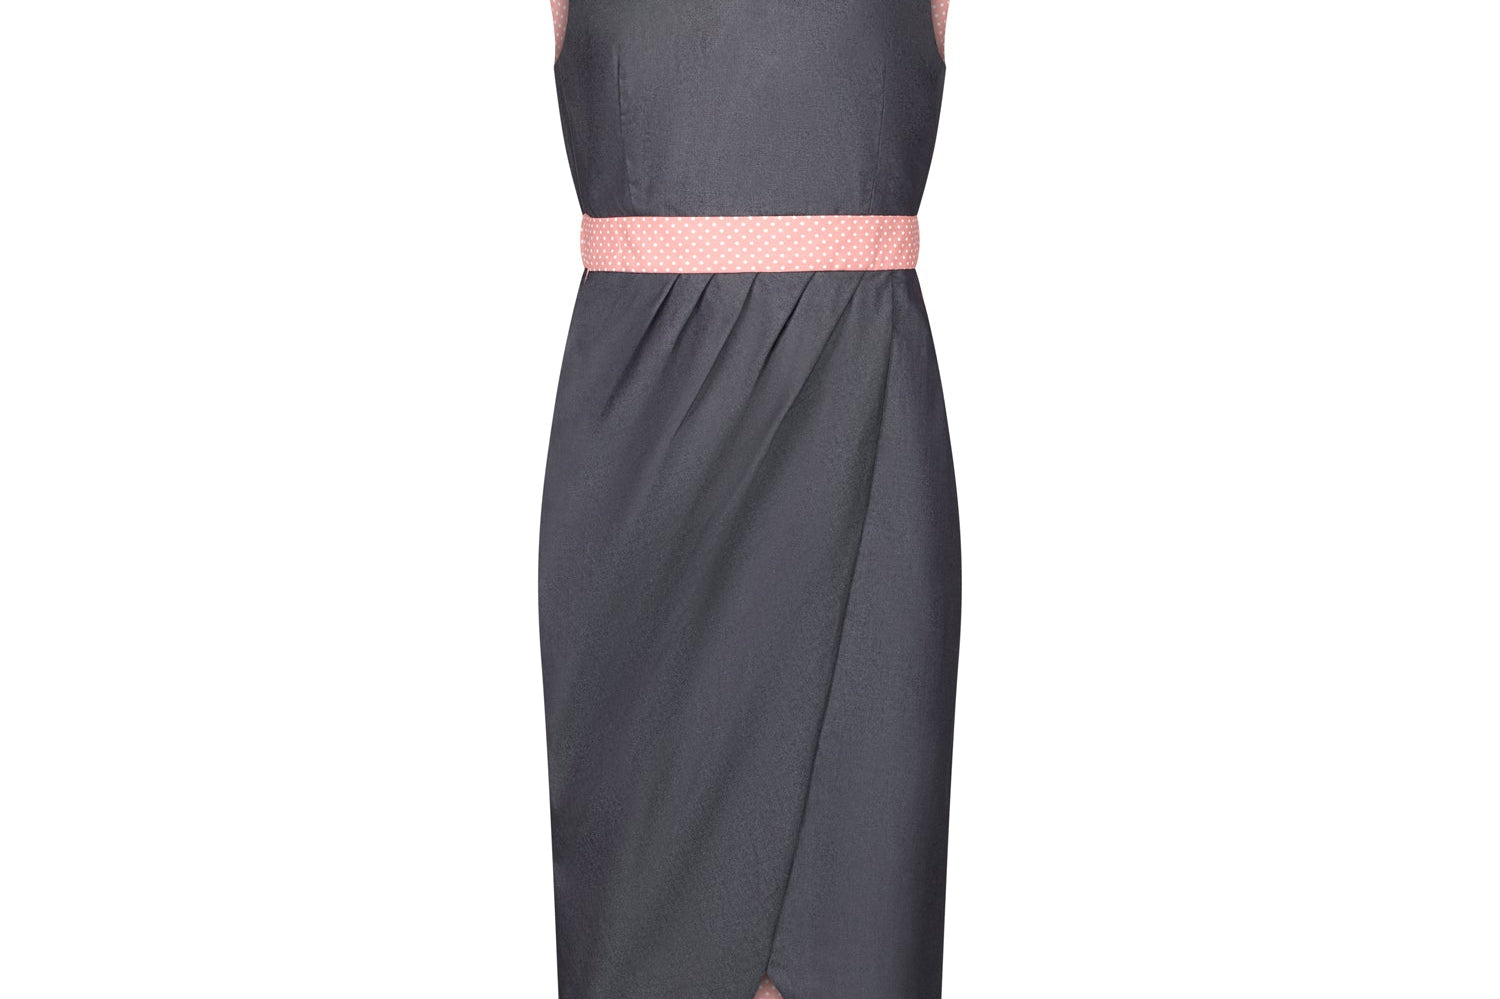 Denim Illusion wrap dress with Pink and white spot contrast fabric, front view